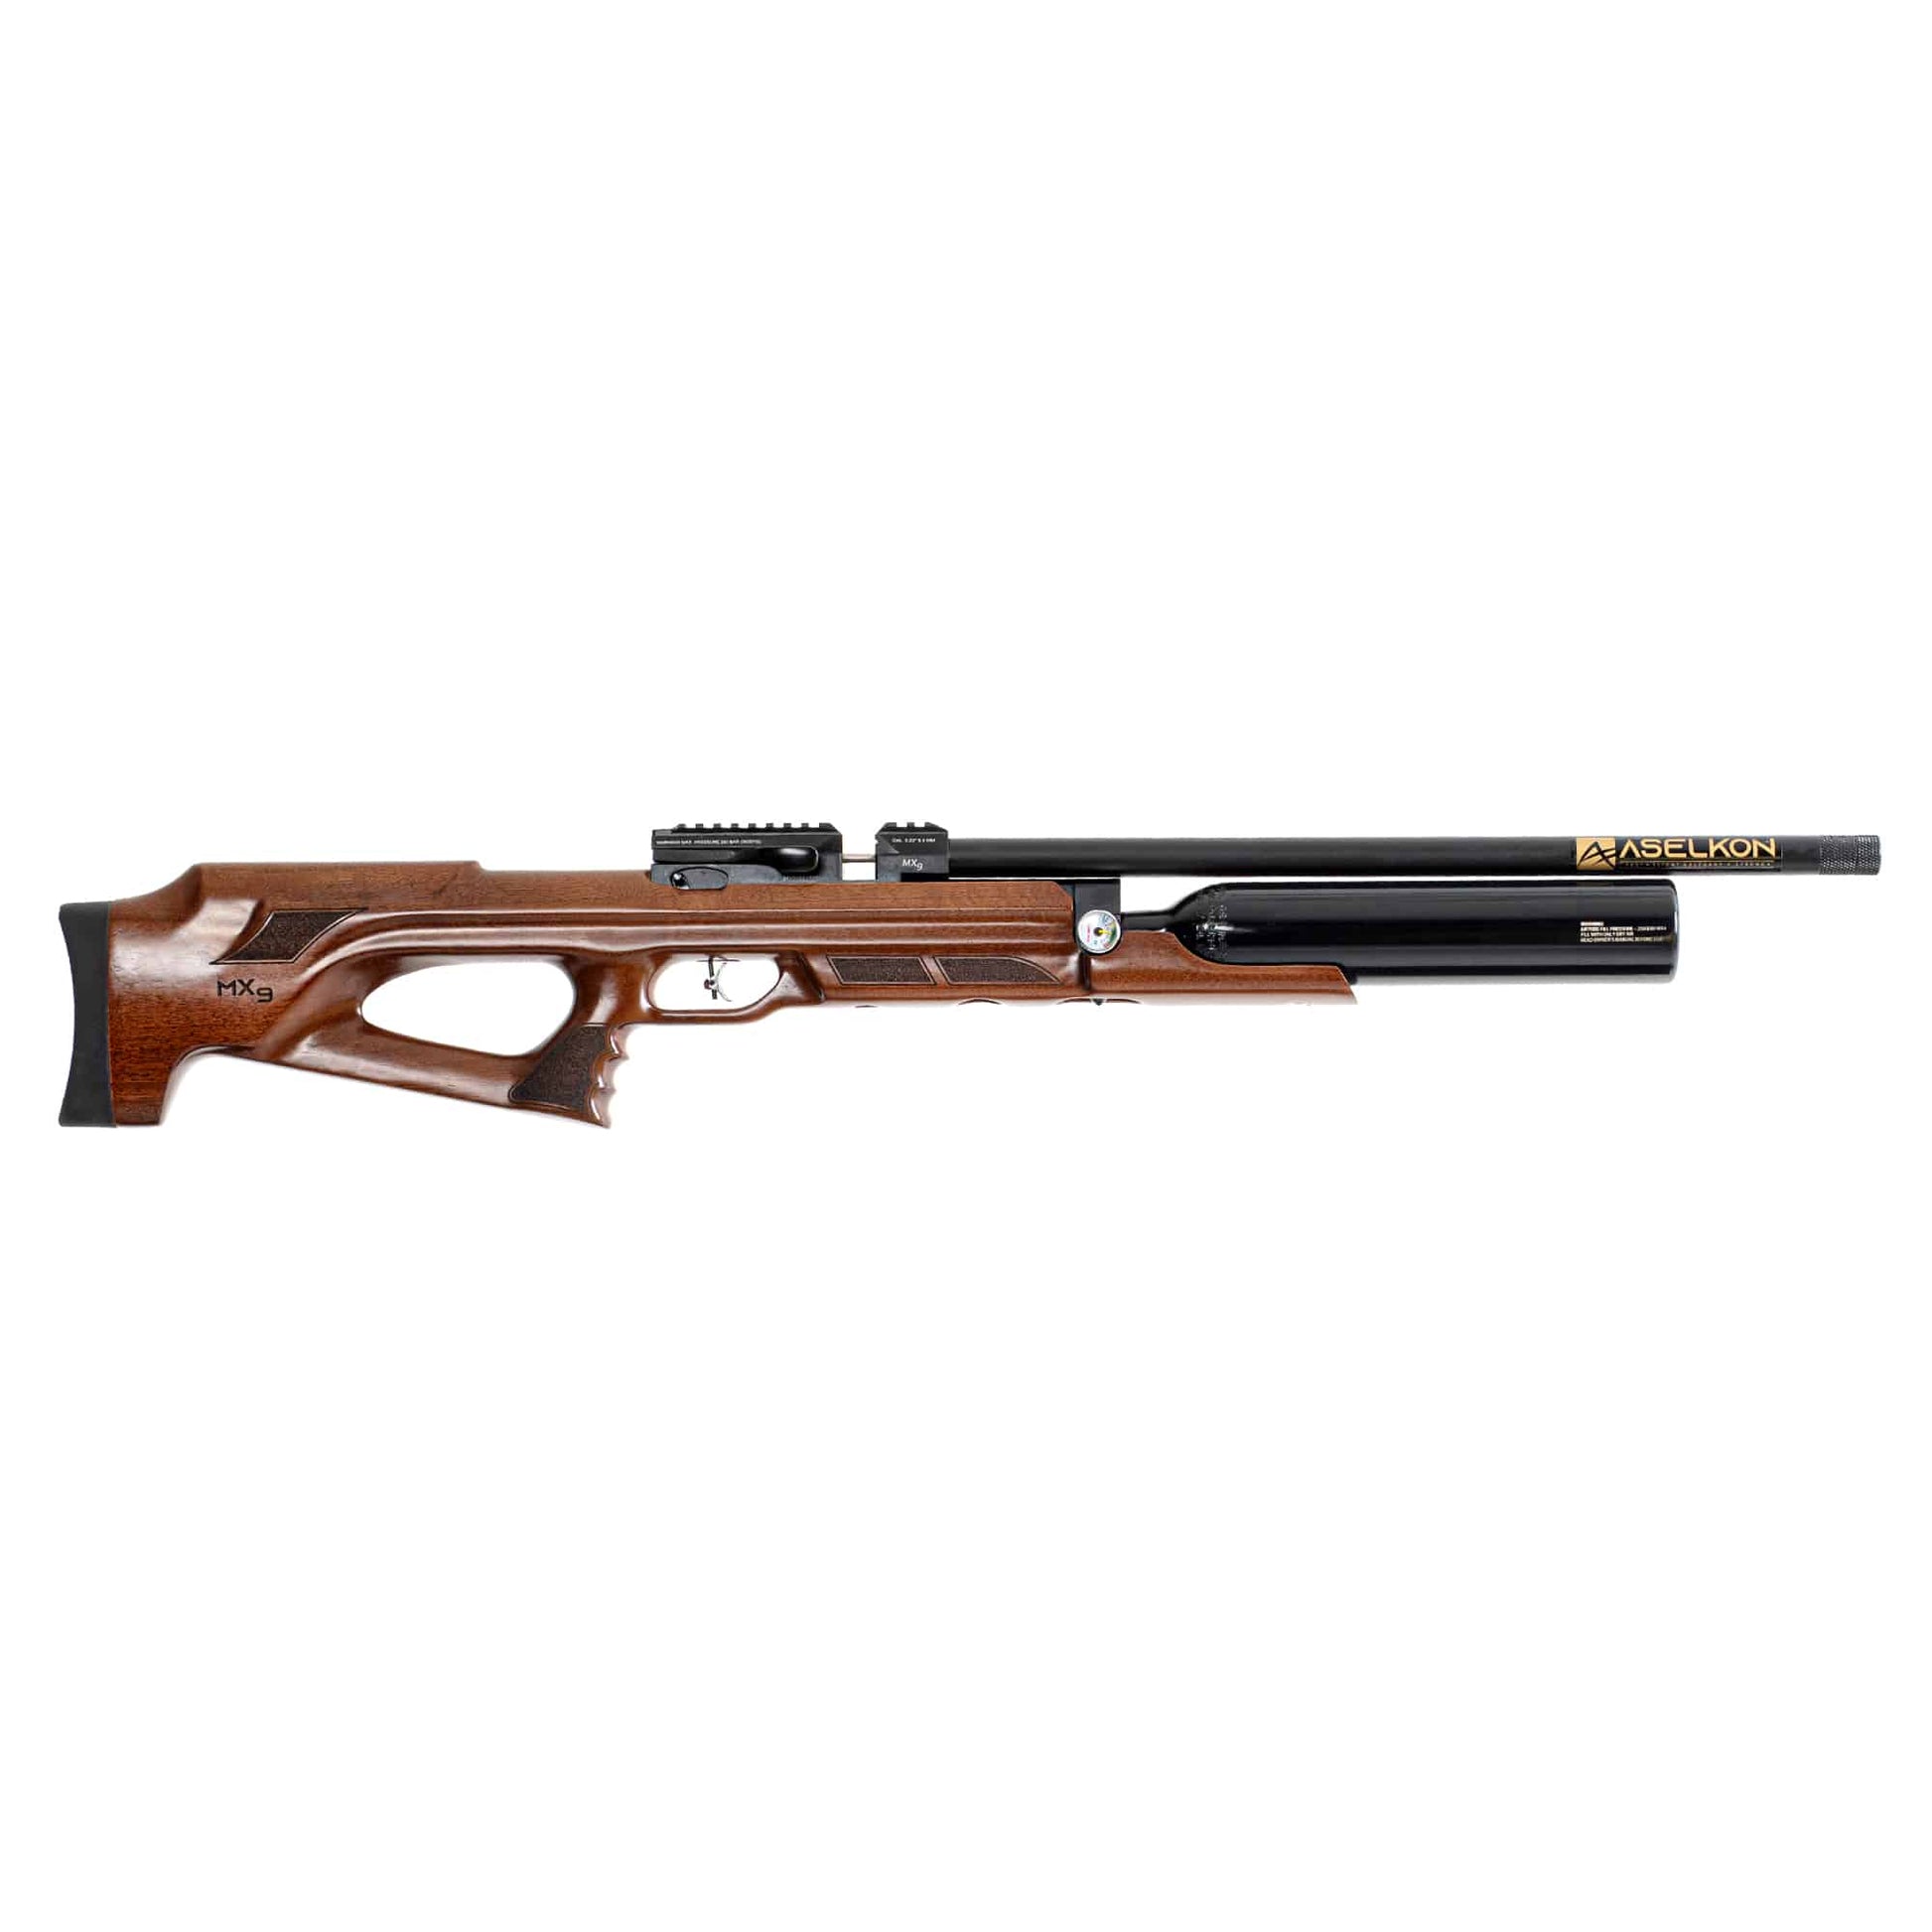 Right side view of a brown and black Aselkon MX9 Wood .177 Caliber PCP Air rifle